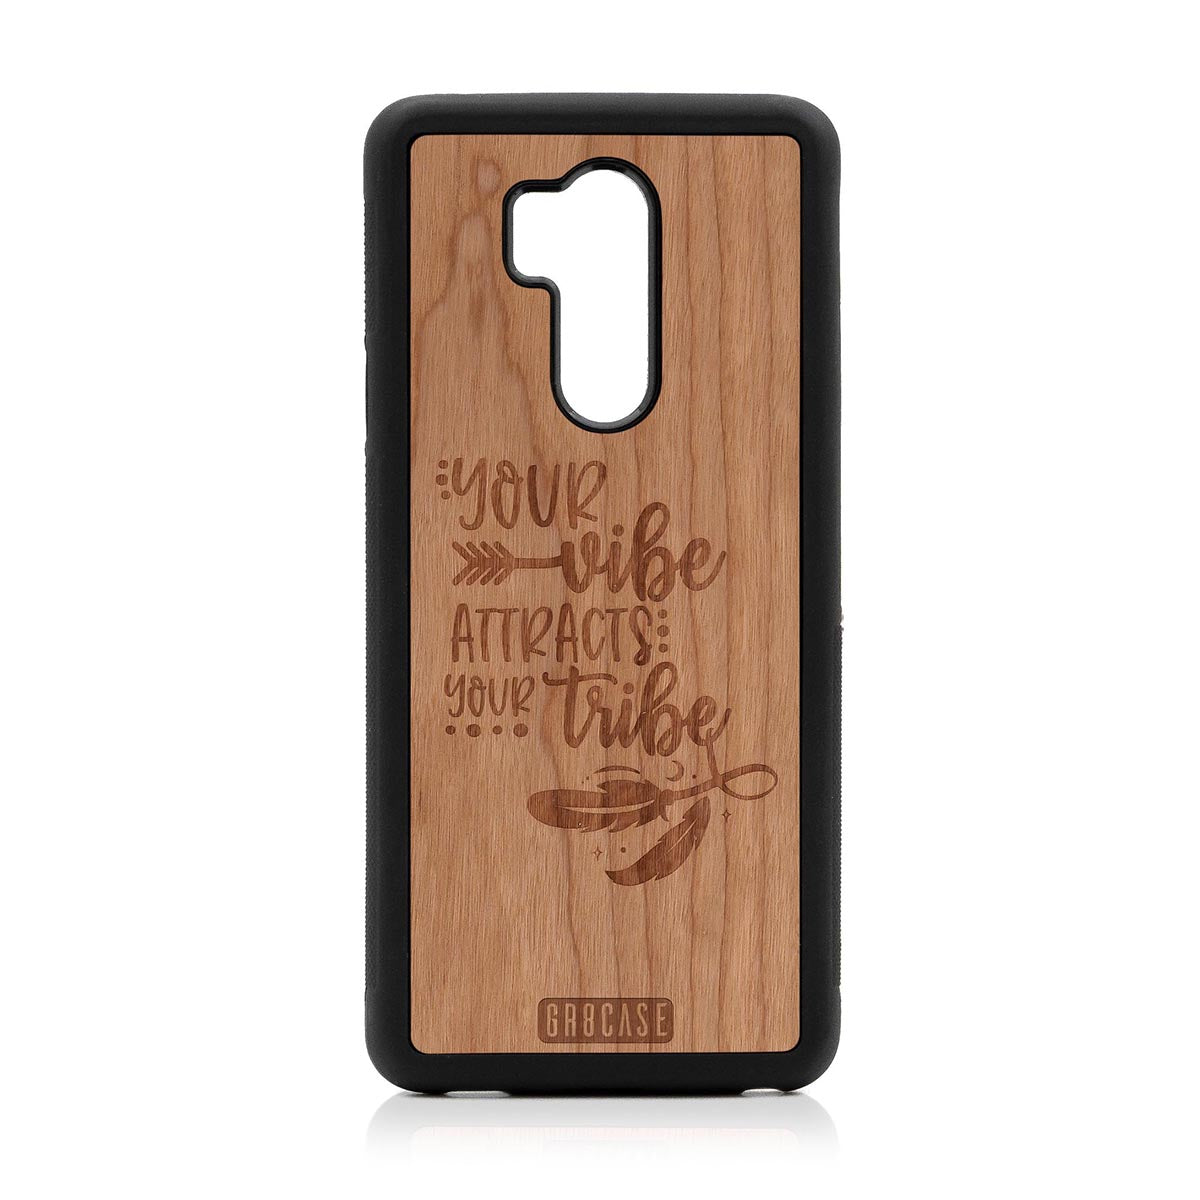 Your Vibe Attracts Your Tribe Design Wood Case LG G7 ThinQ